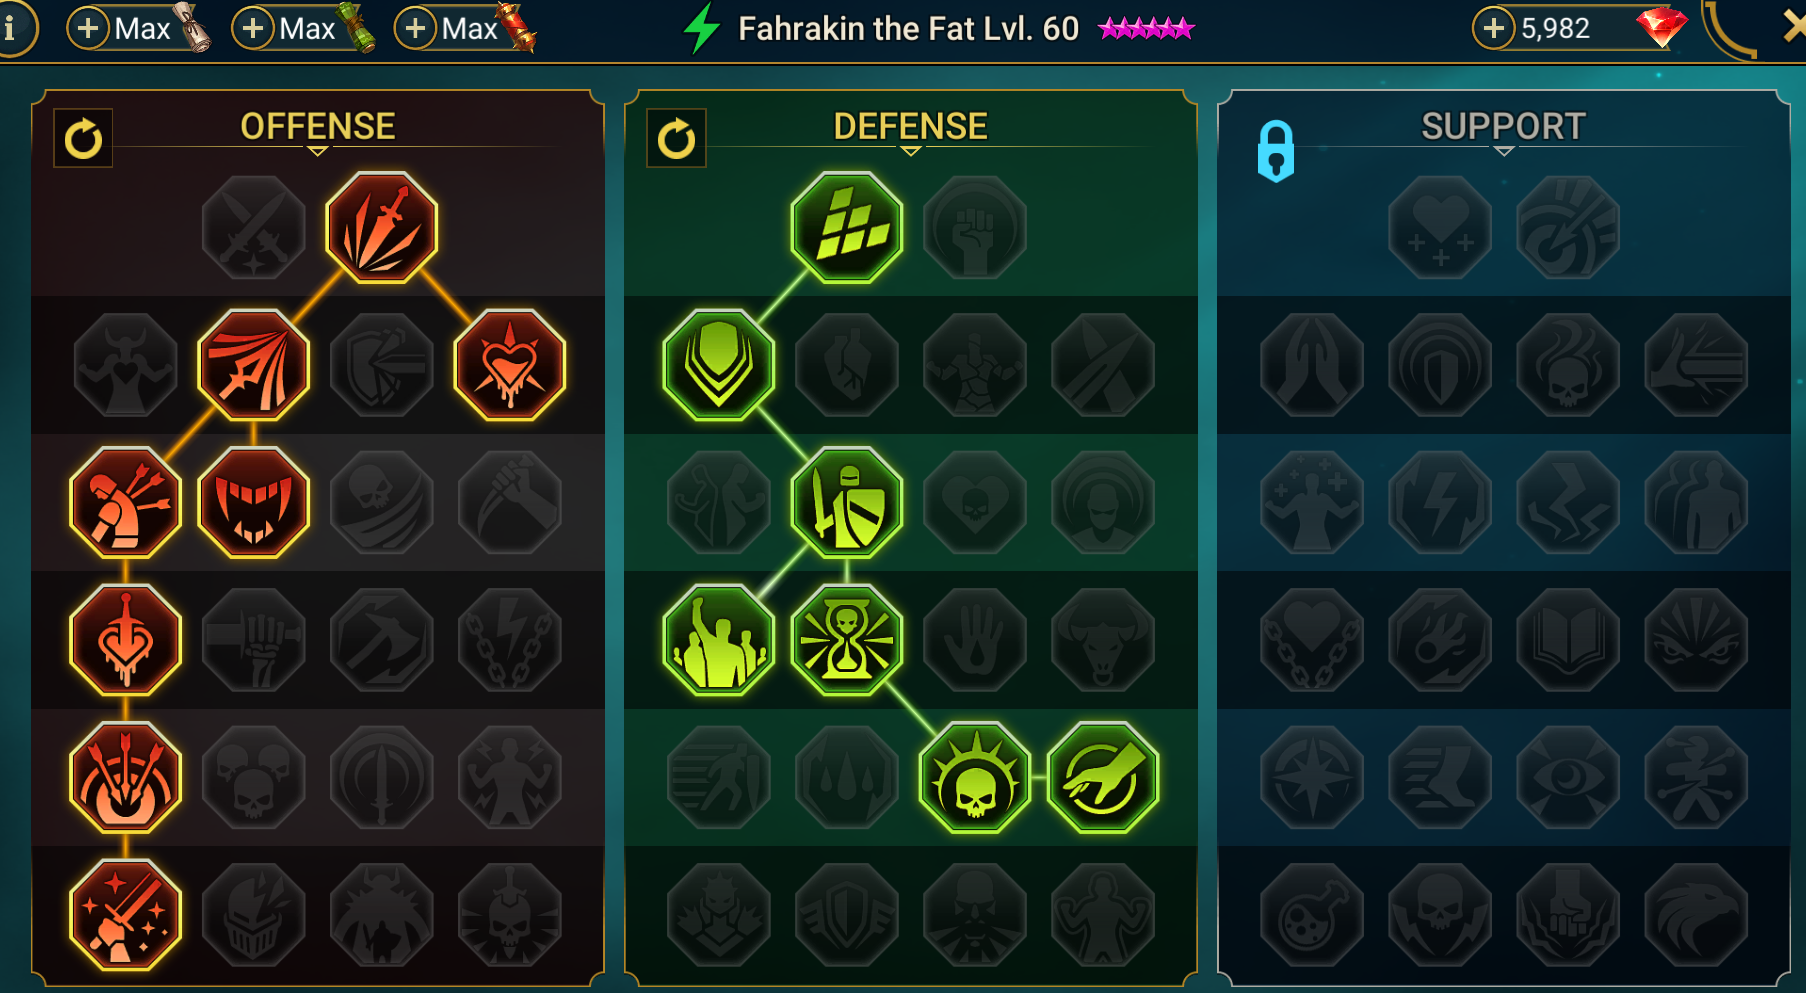 Fahrakin the Fat in the Budget Unkillable Comp masteries